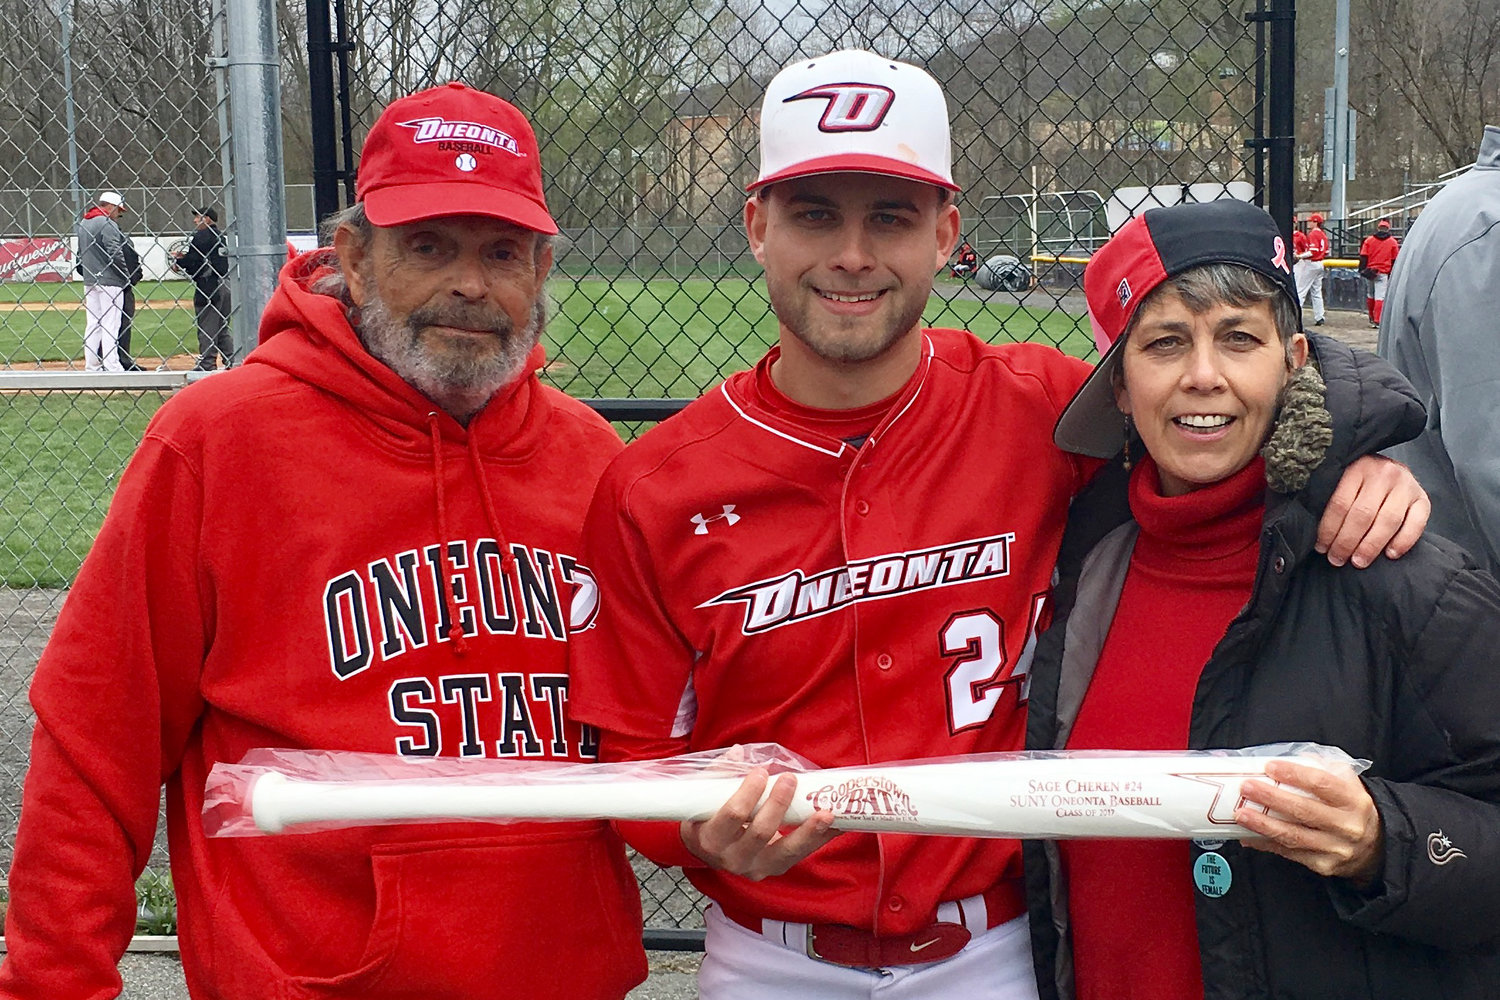 Ivan Cheren (left) and Deb Derella Cheren (right) pictured with their son Sage (center) after his last college game for SUNY Oneonta in 2017. Sage is now 27 years old and works in the real estate industry. But before that, he made countless memories watching and playing baseball with his father Ivan.